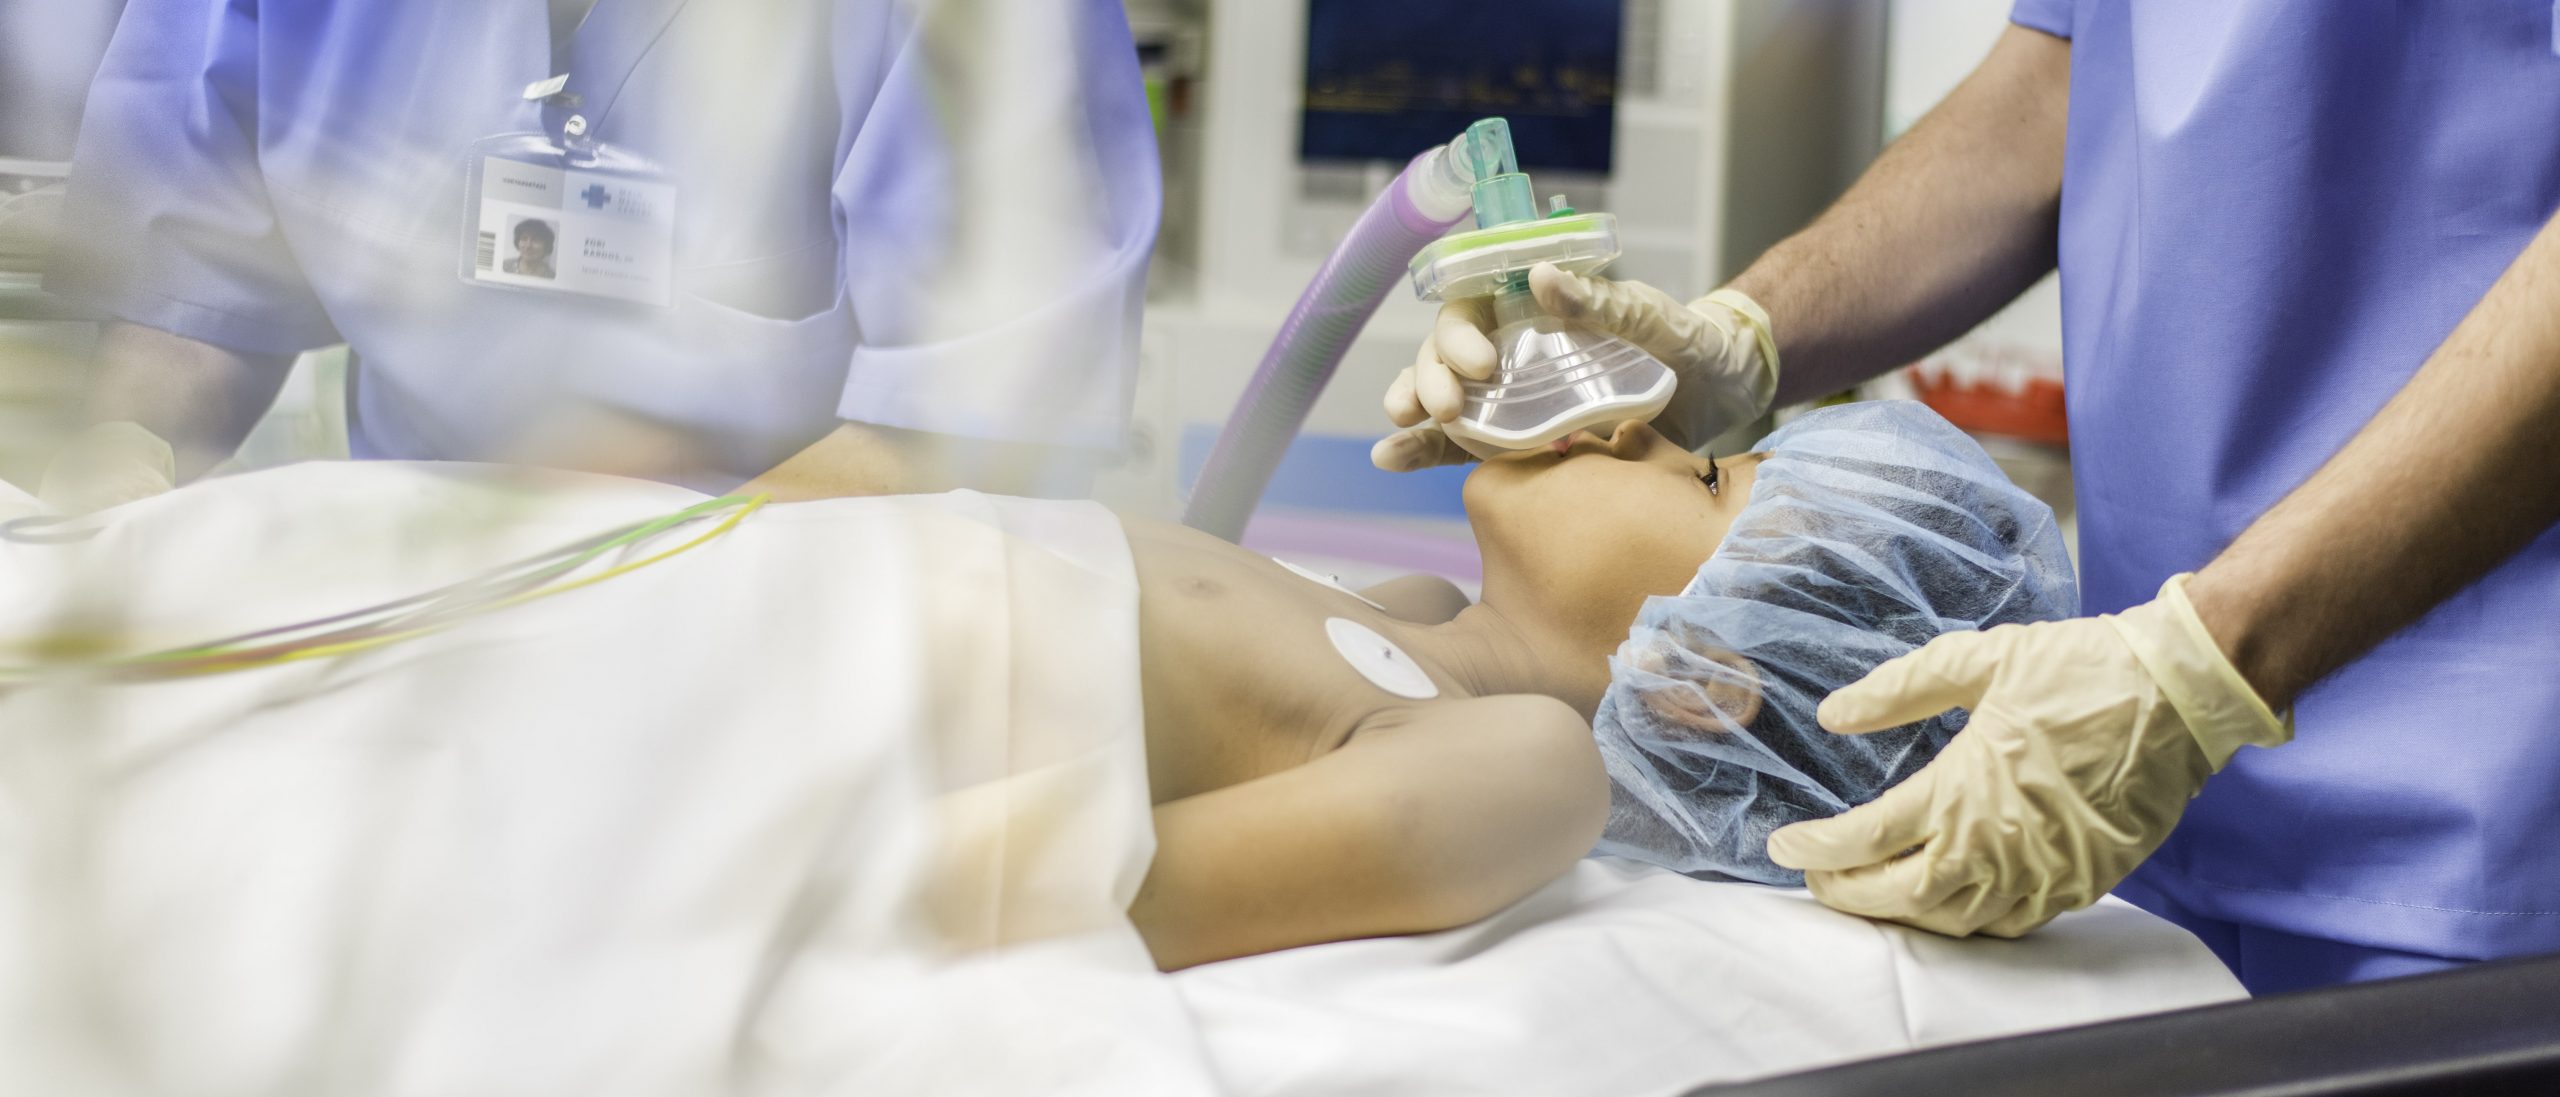 Pediatric patient in an emergency room